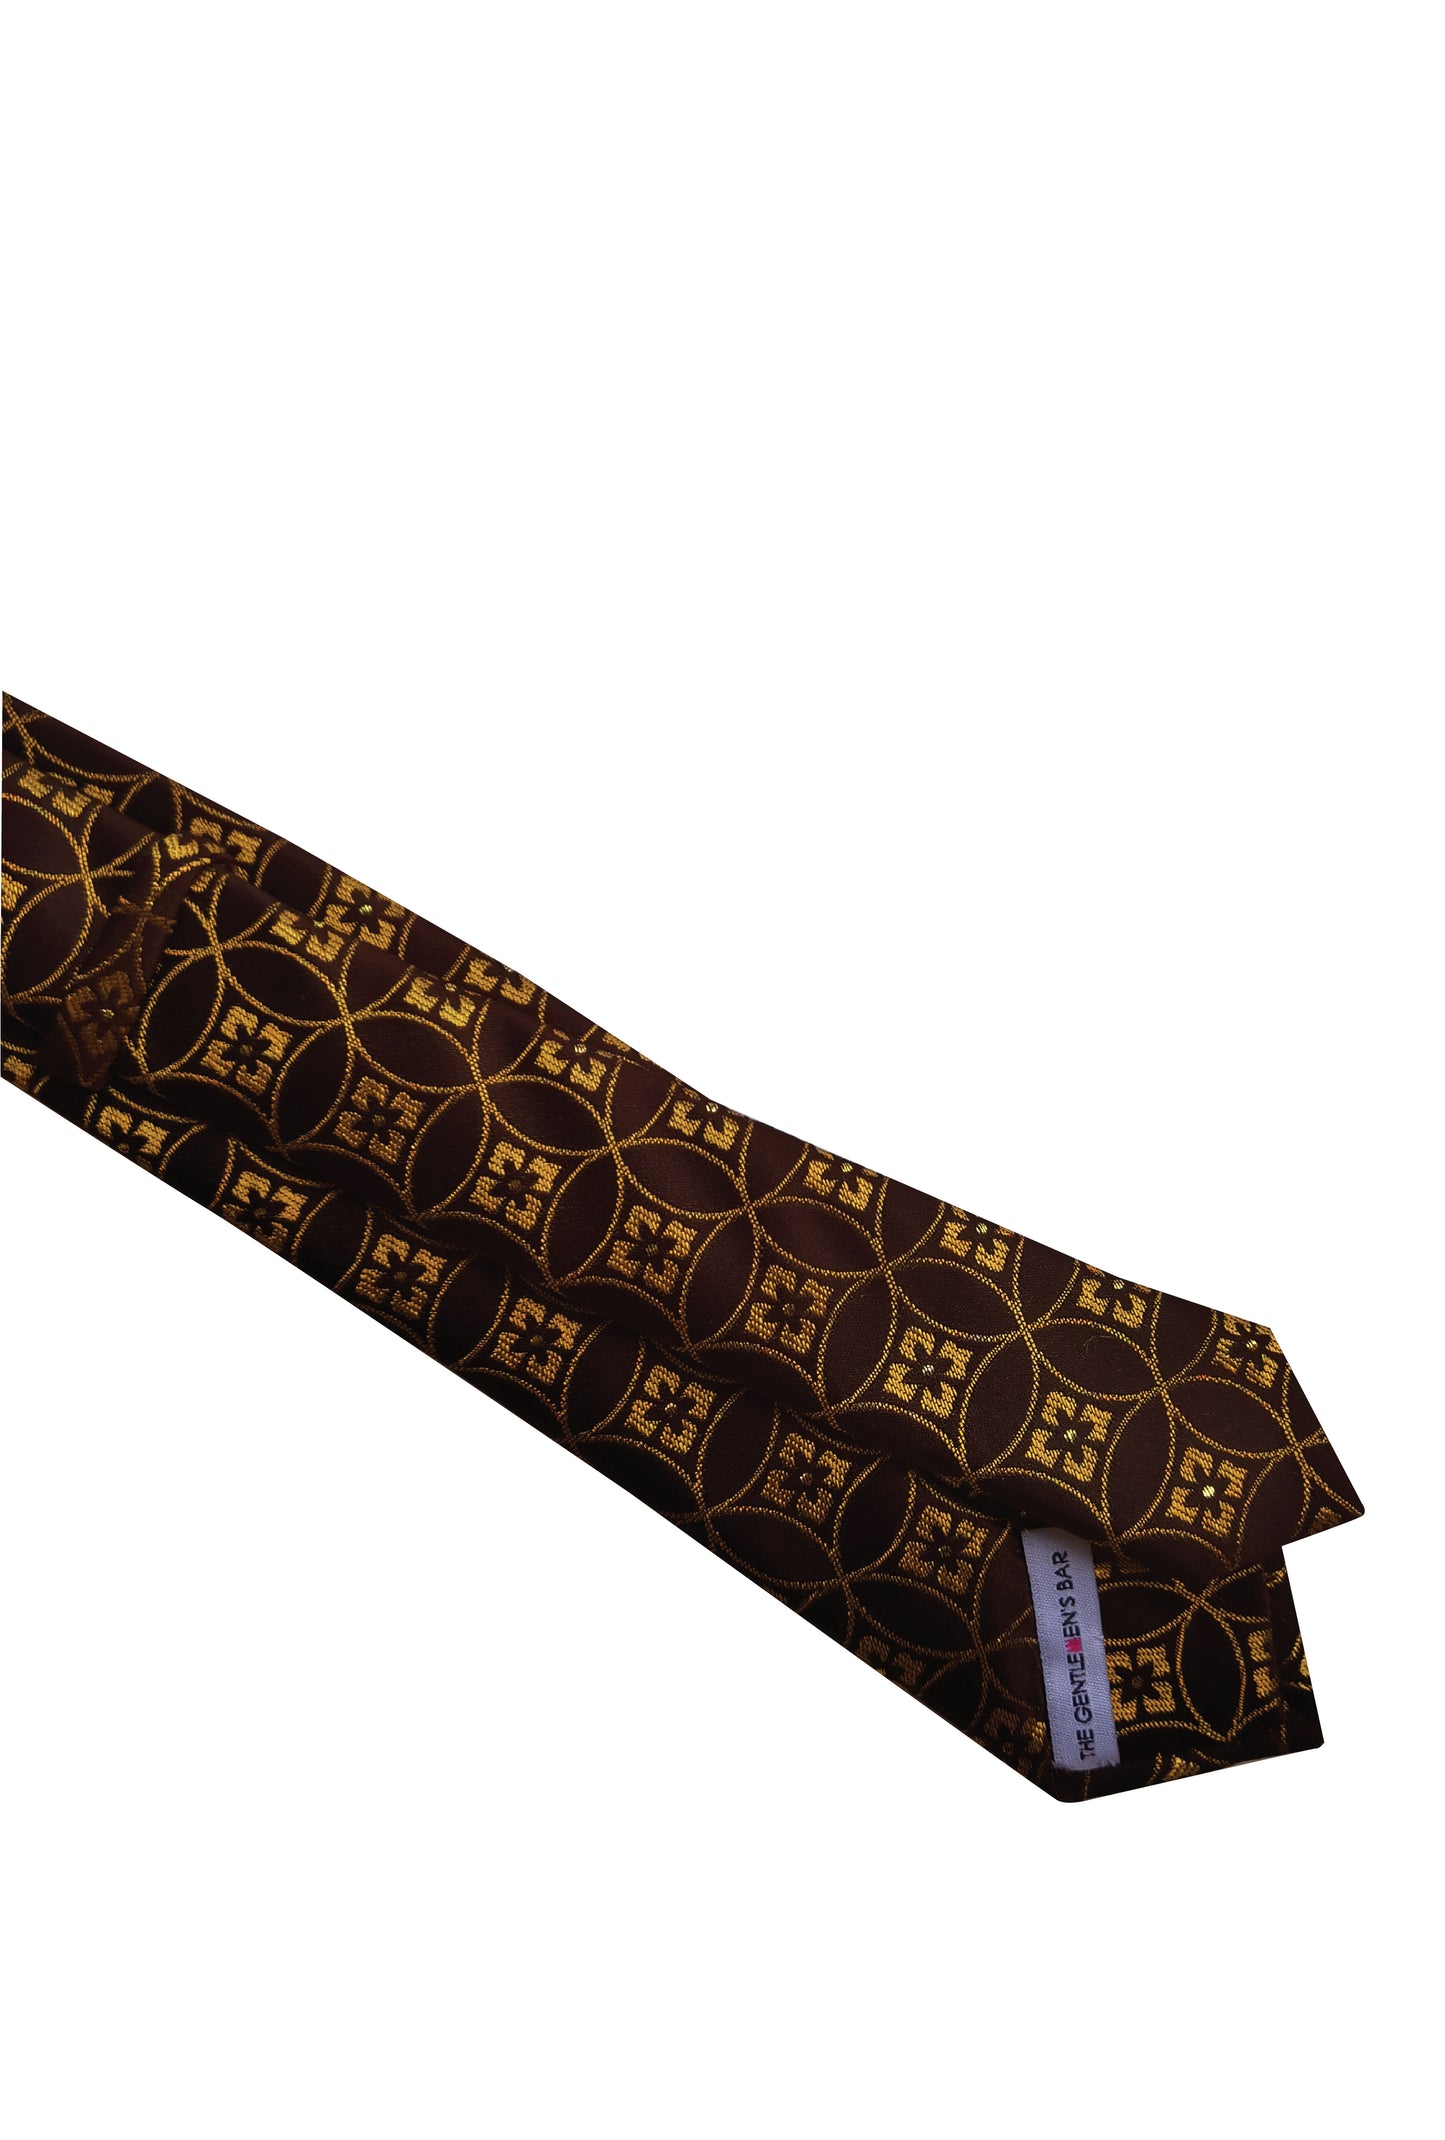 THE TONG QIAN BR TIE